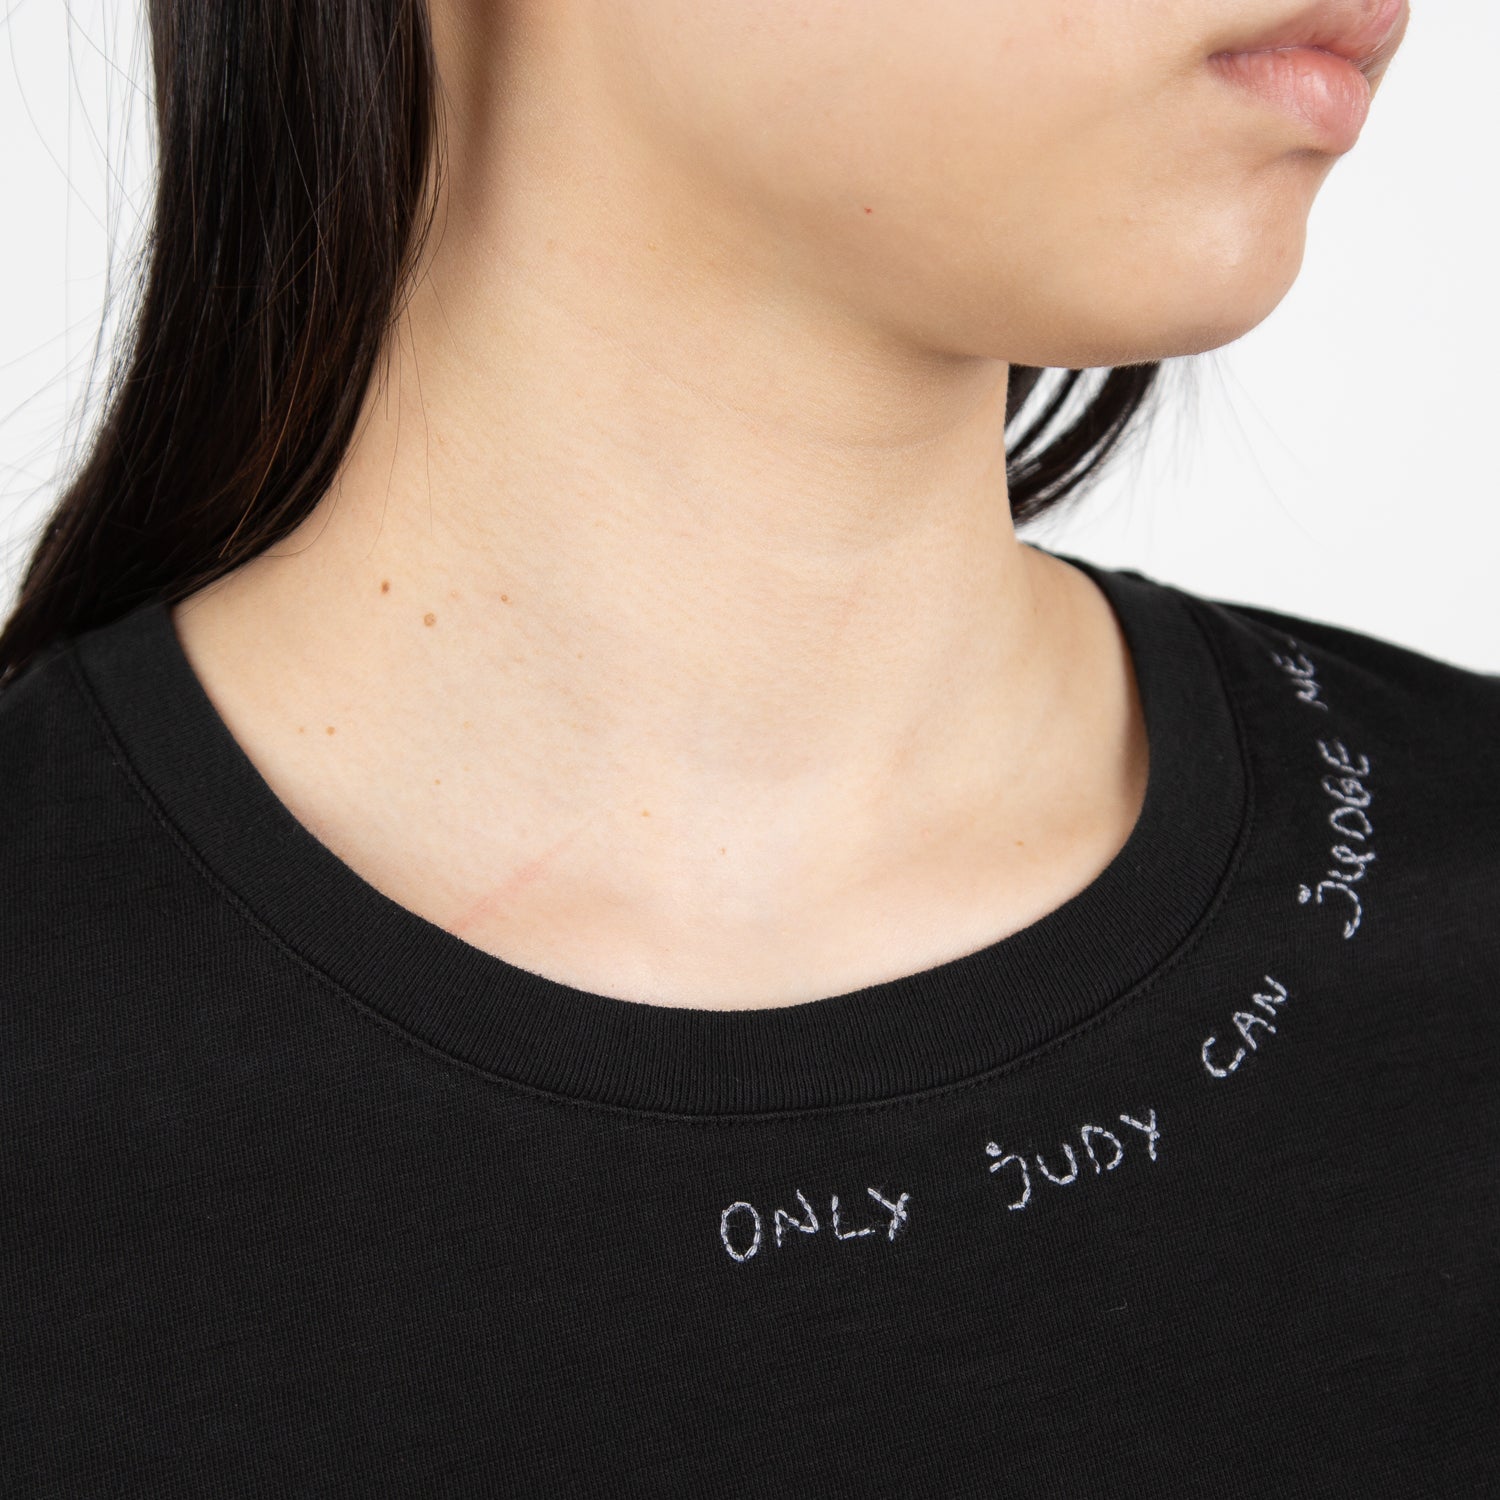 woven black cotton shirt with phrase by Secret Location